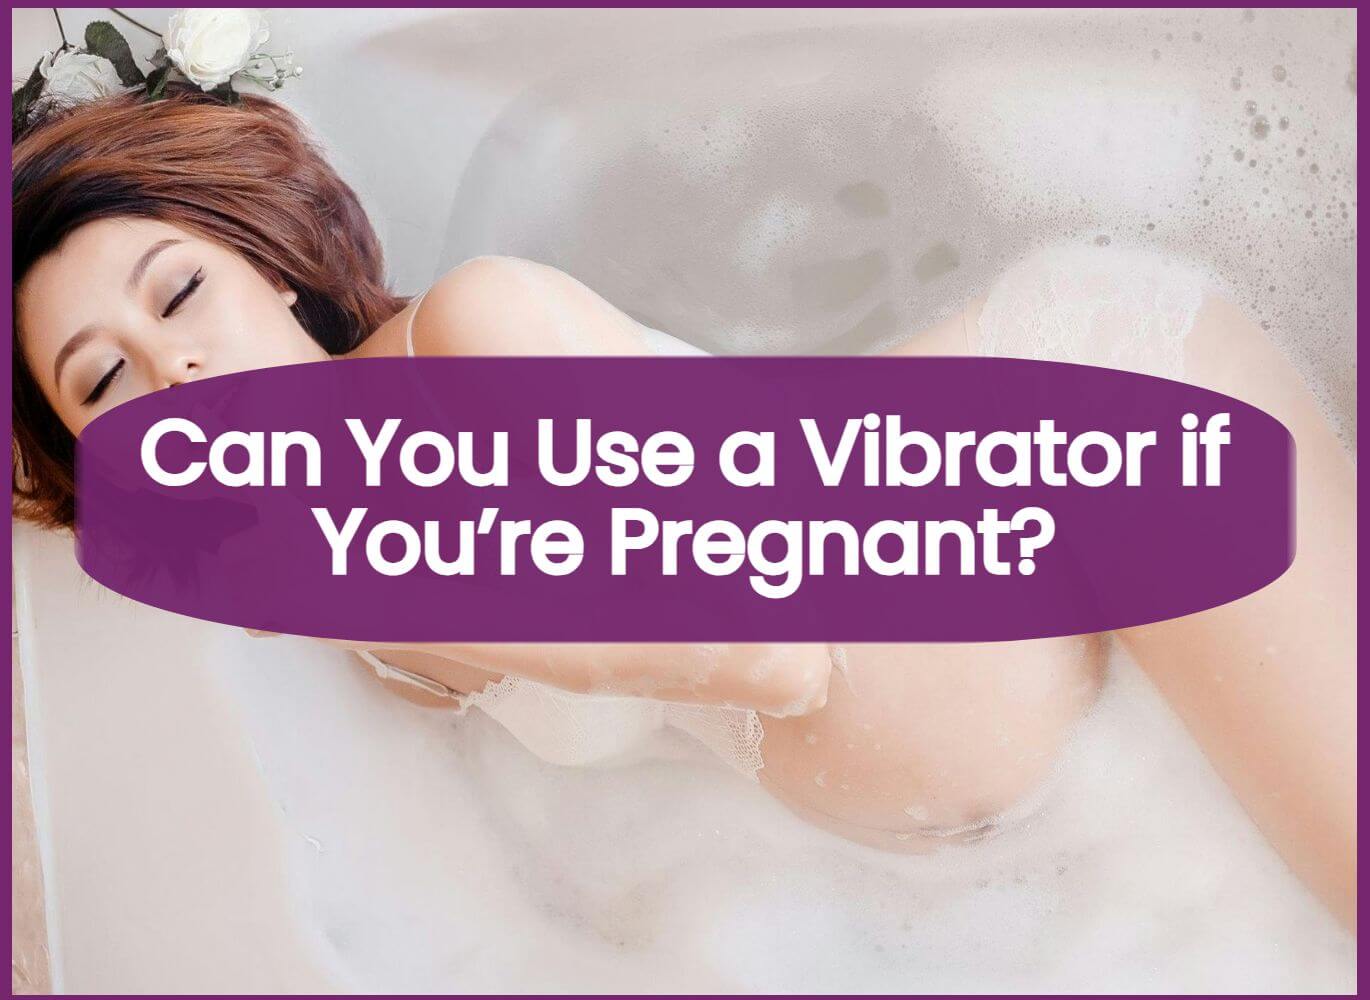 Can You Use a Vibrator if You’re Pregnant?